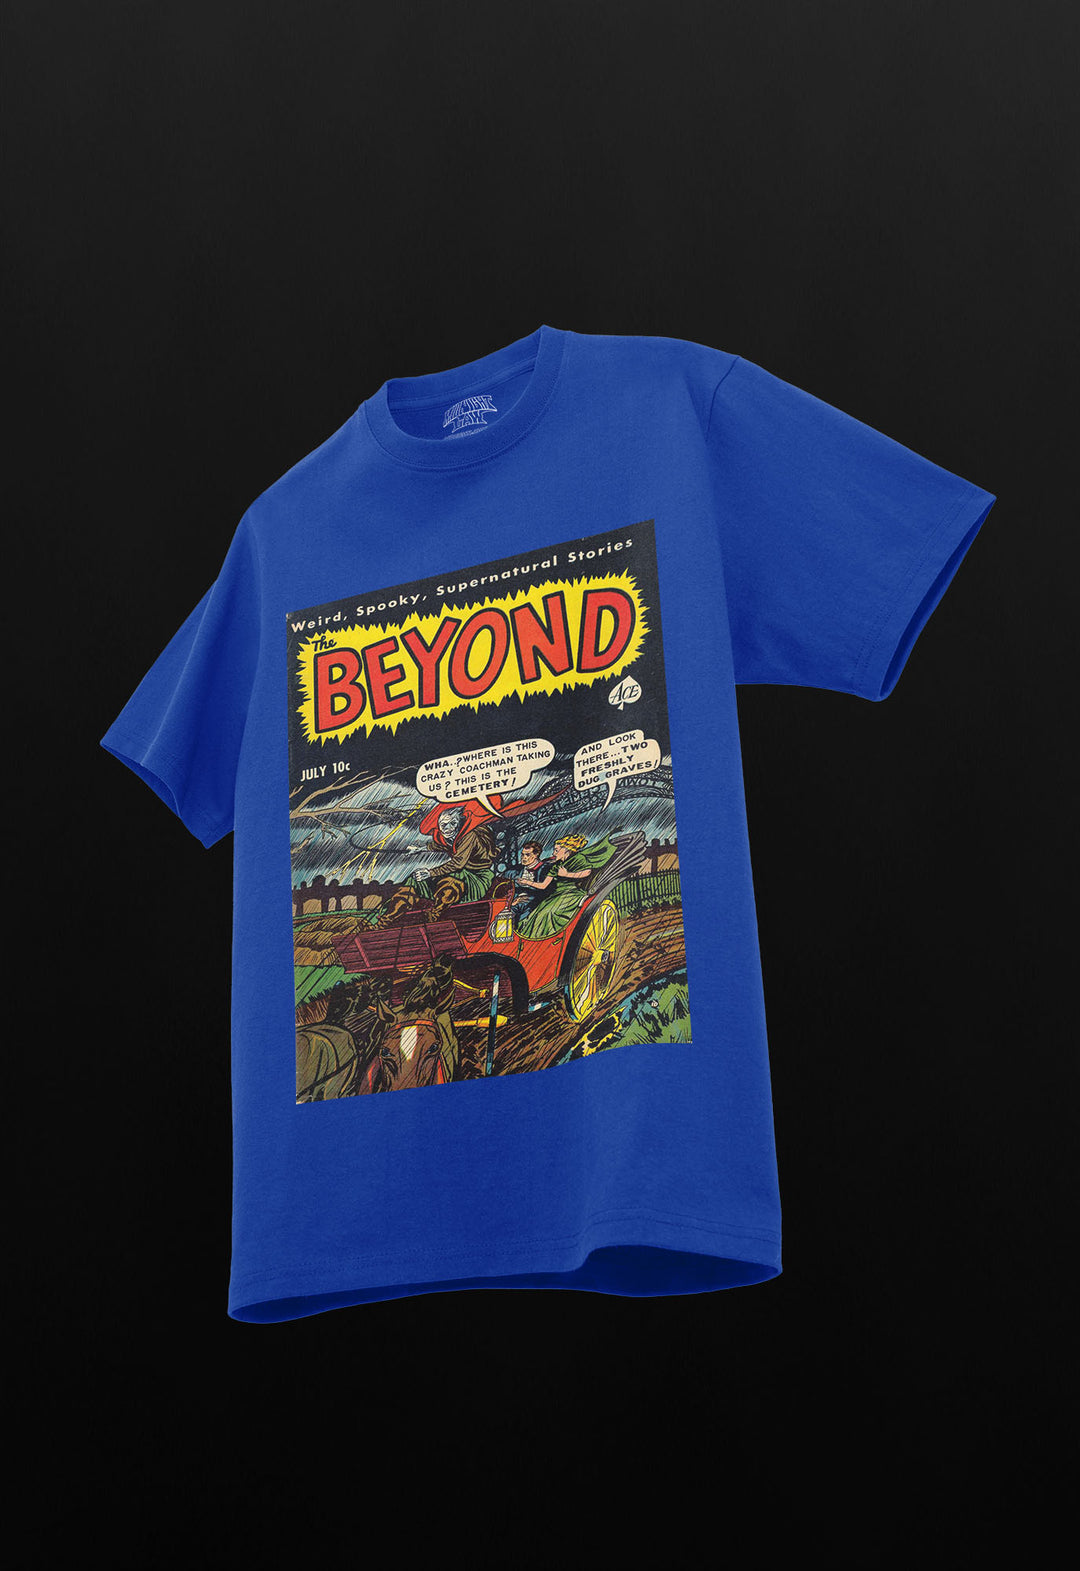 The Beyond Oversized T-Shirt